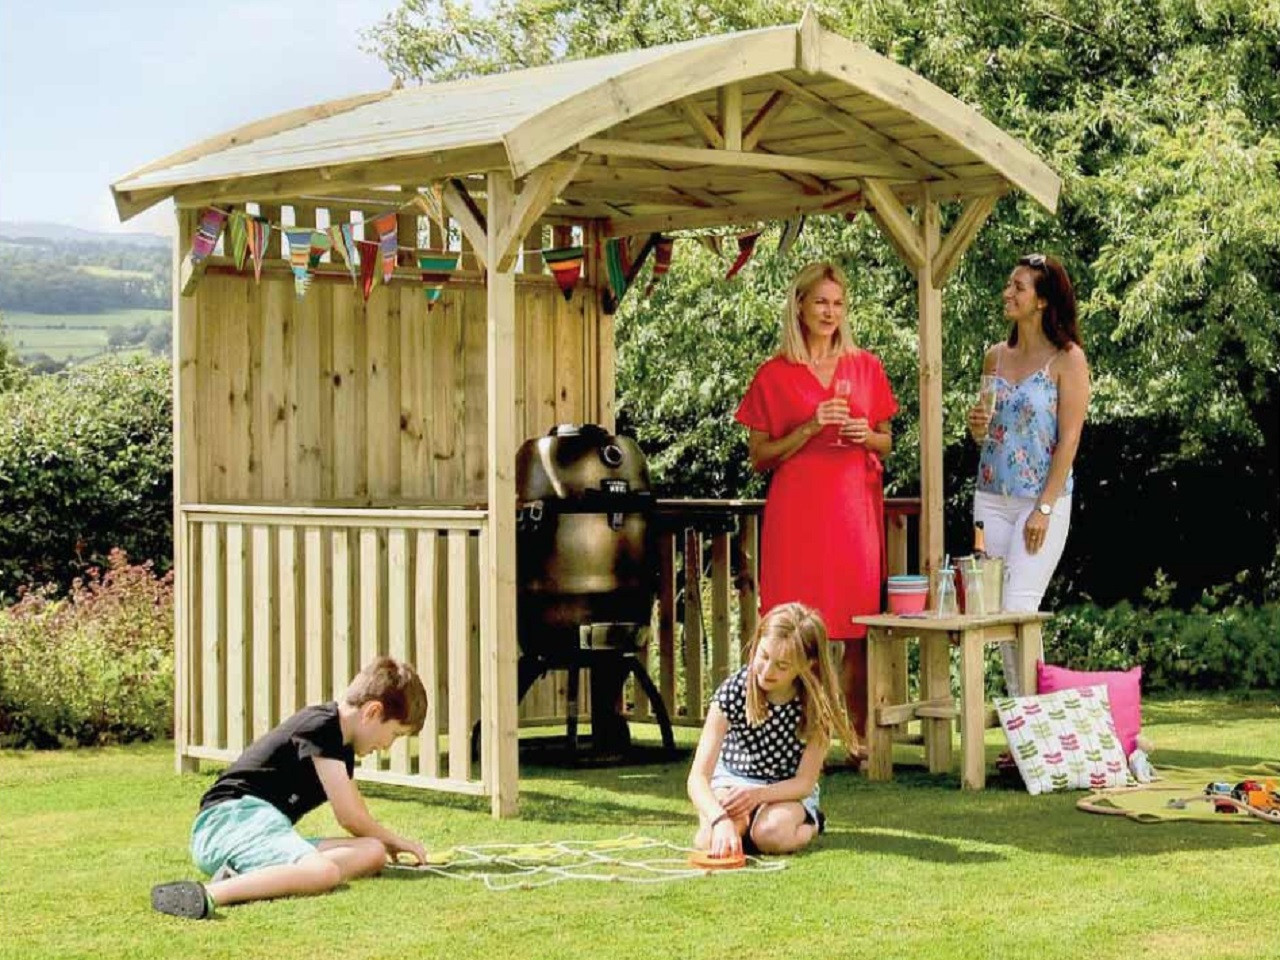 the Appleton gazebo, being enjoyed by adults and children